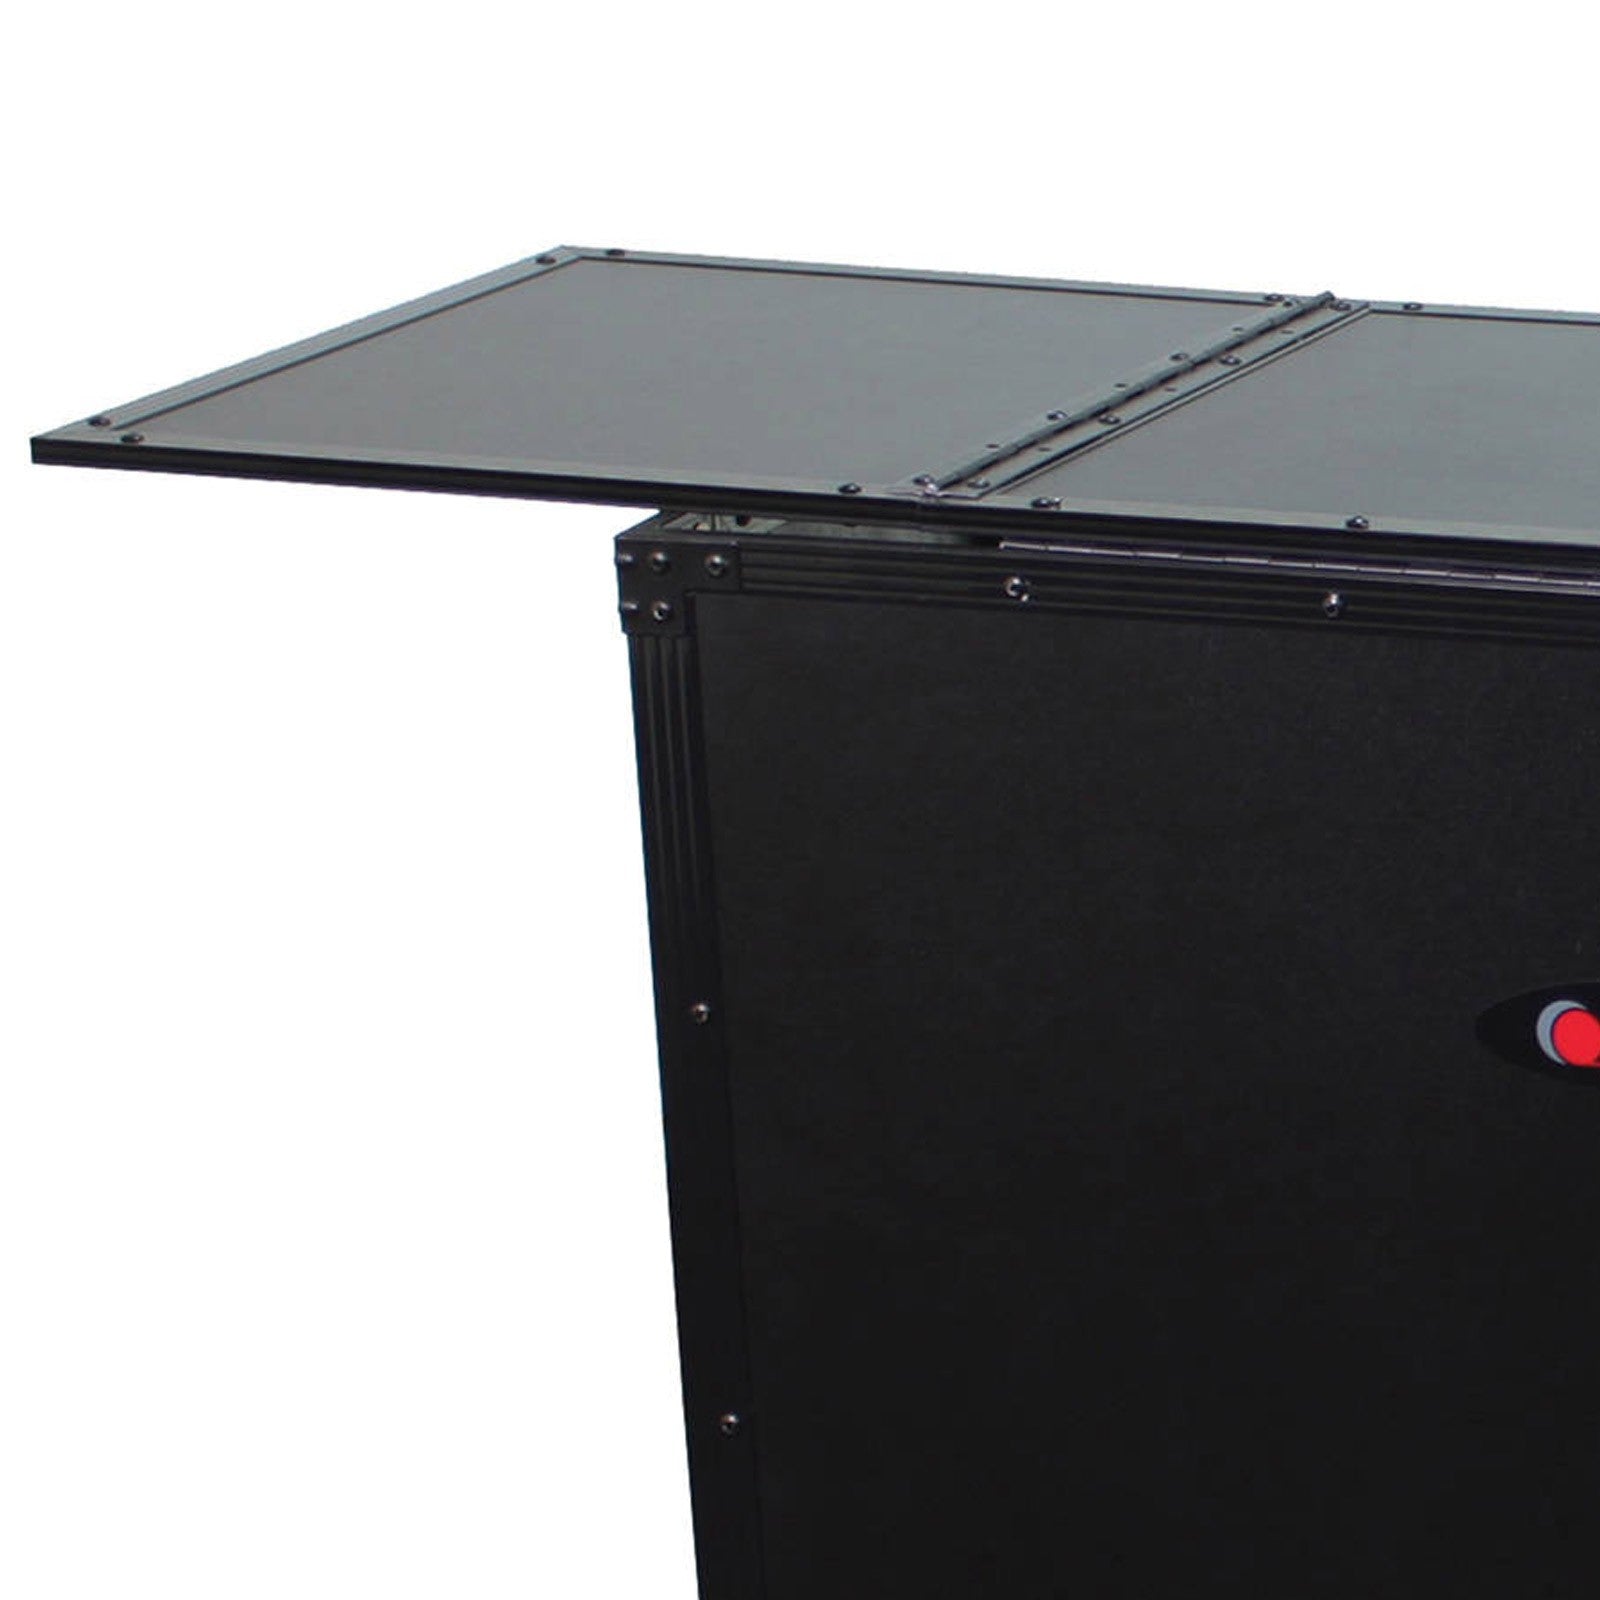 Odyssey FZF5437TBL Black Label Fold-out DJ Table Stand | Open Box - Hollywood DJ